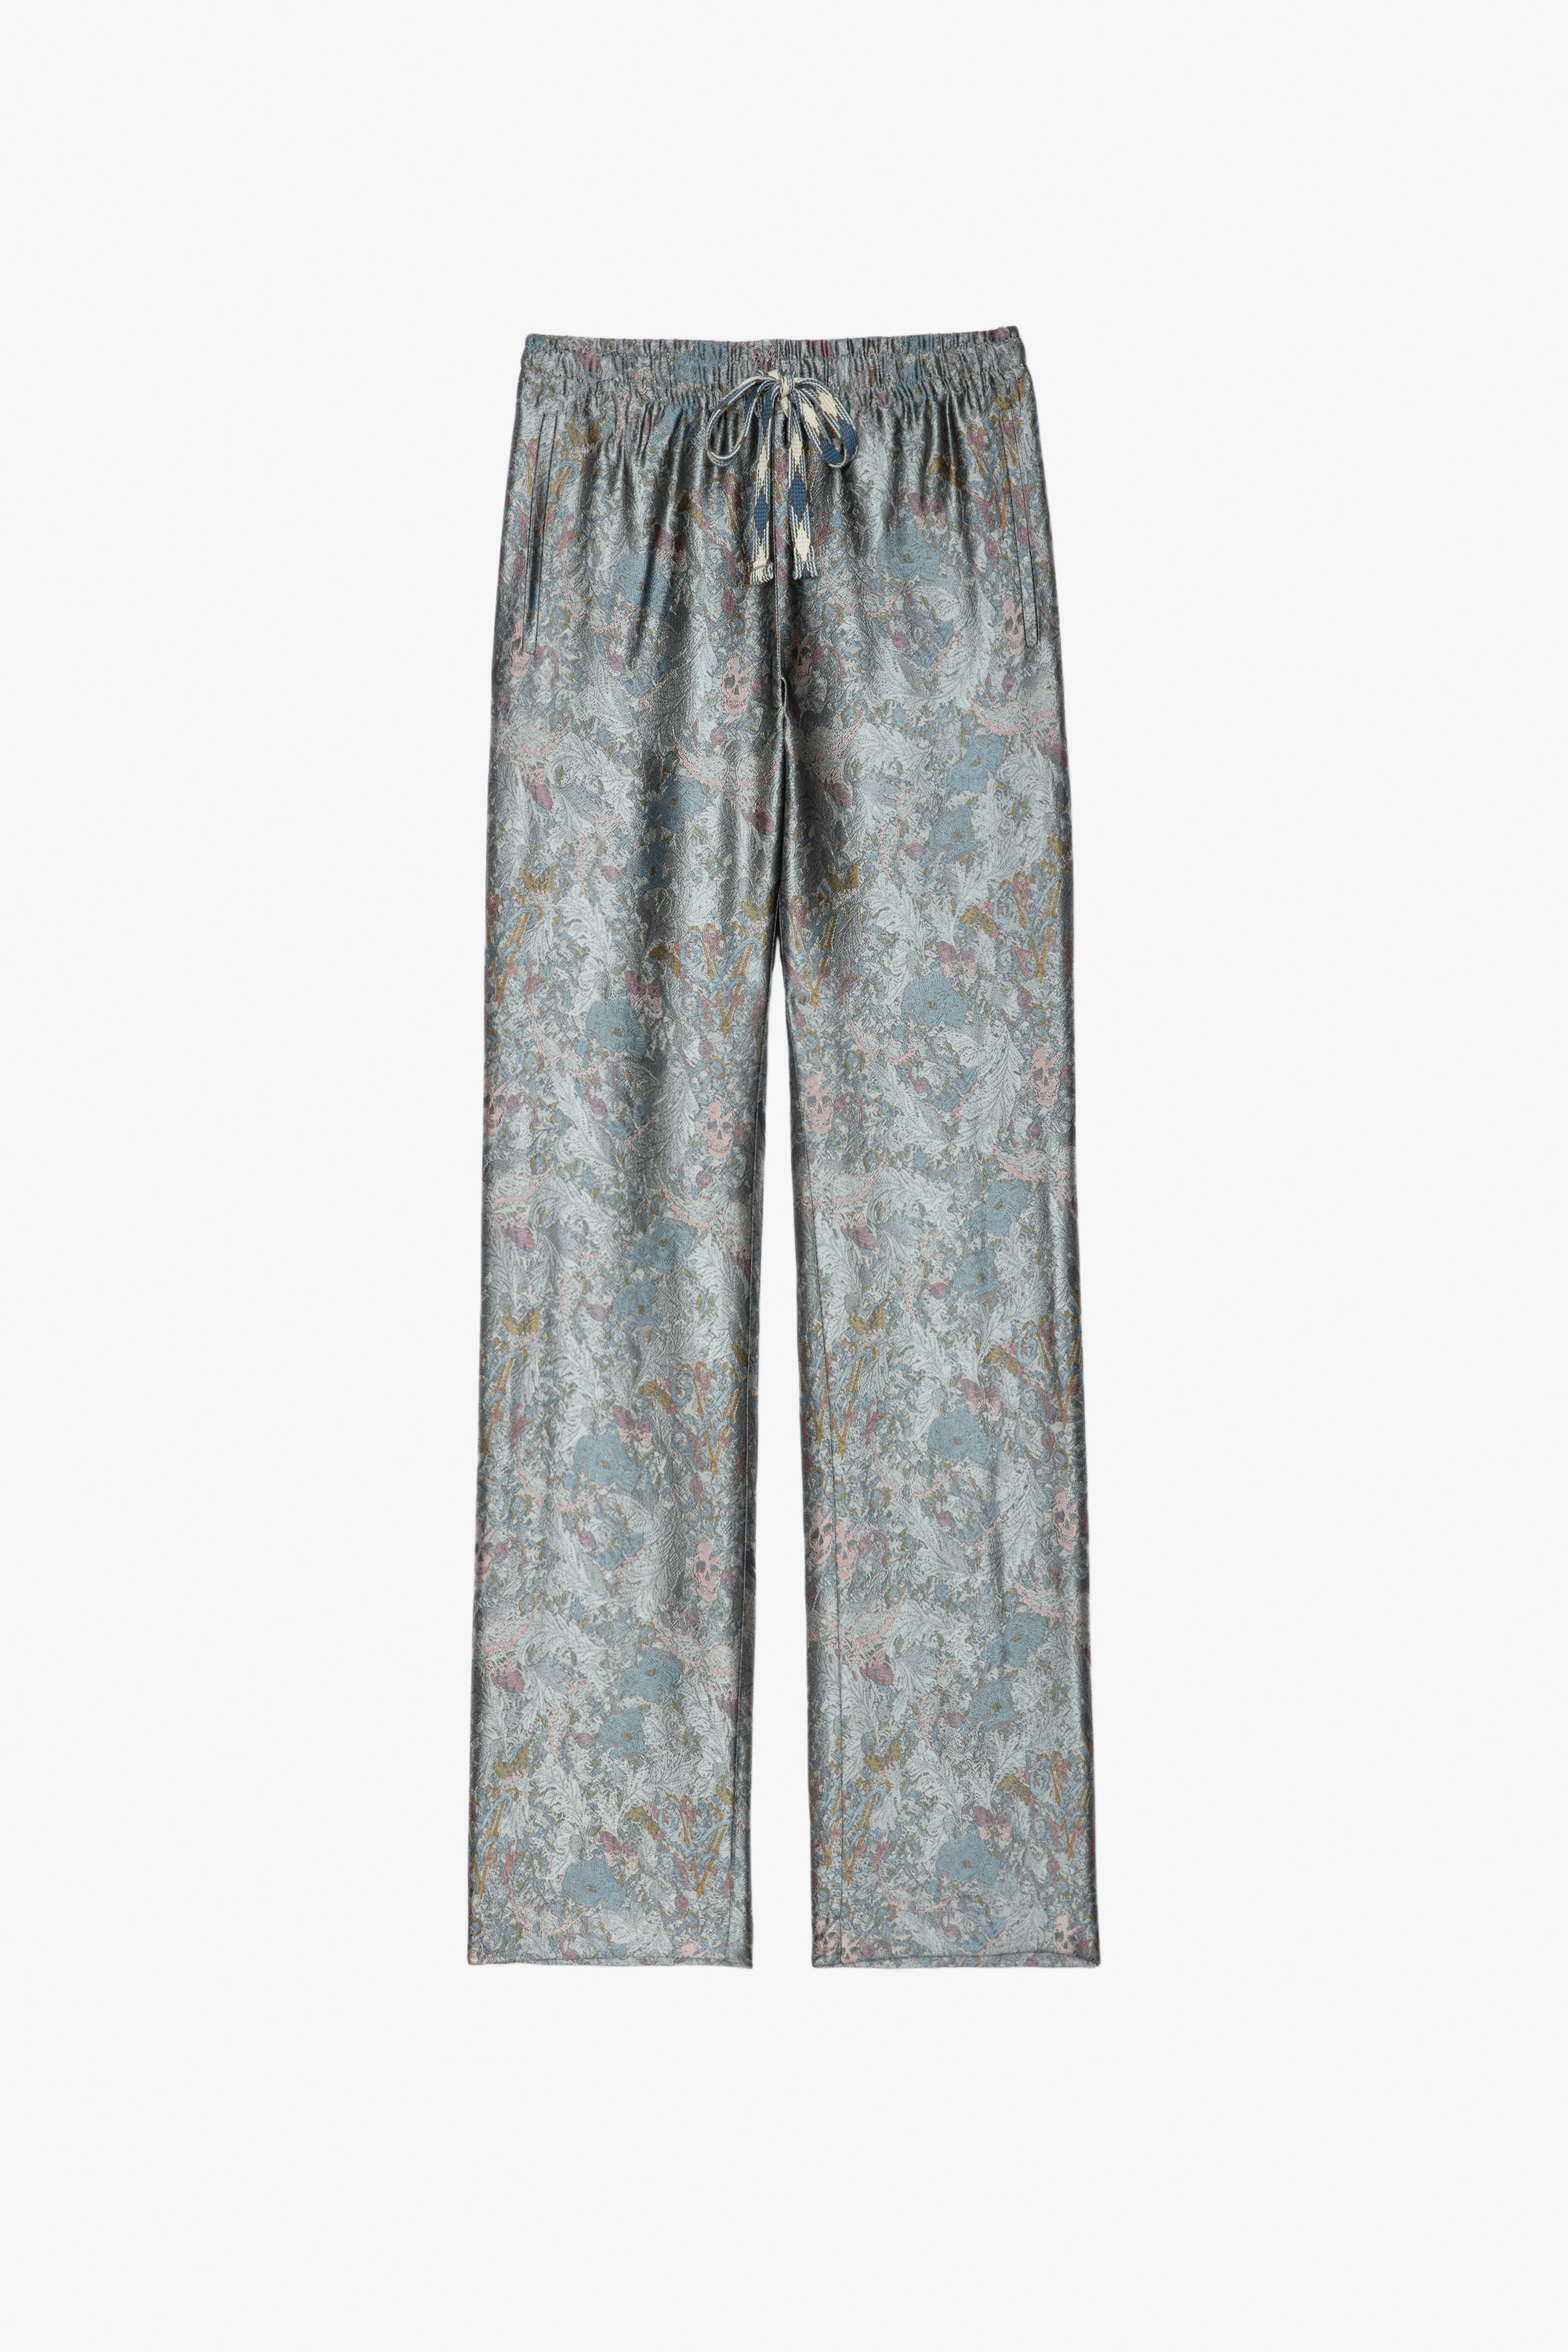 Pomy Trousers Women's metallic-effect trousers with floral Jacquard and skulls